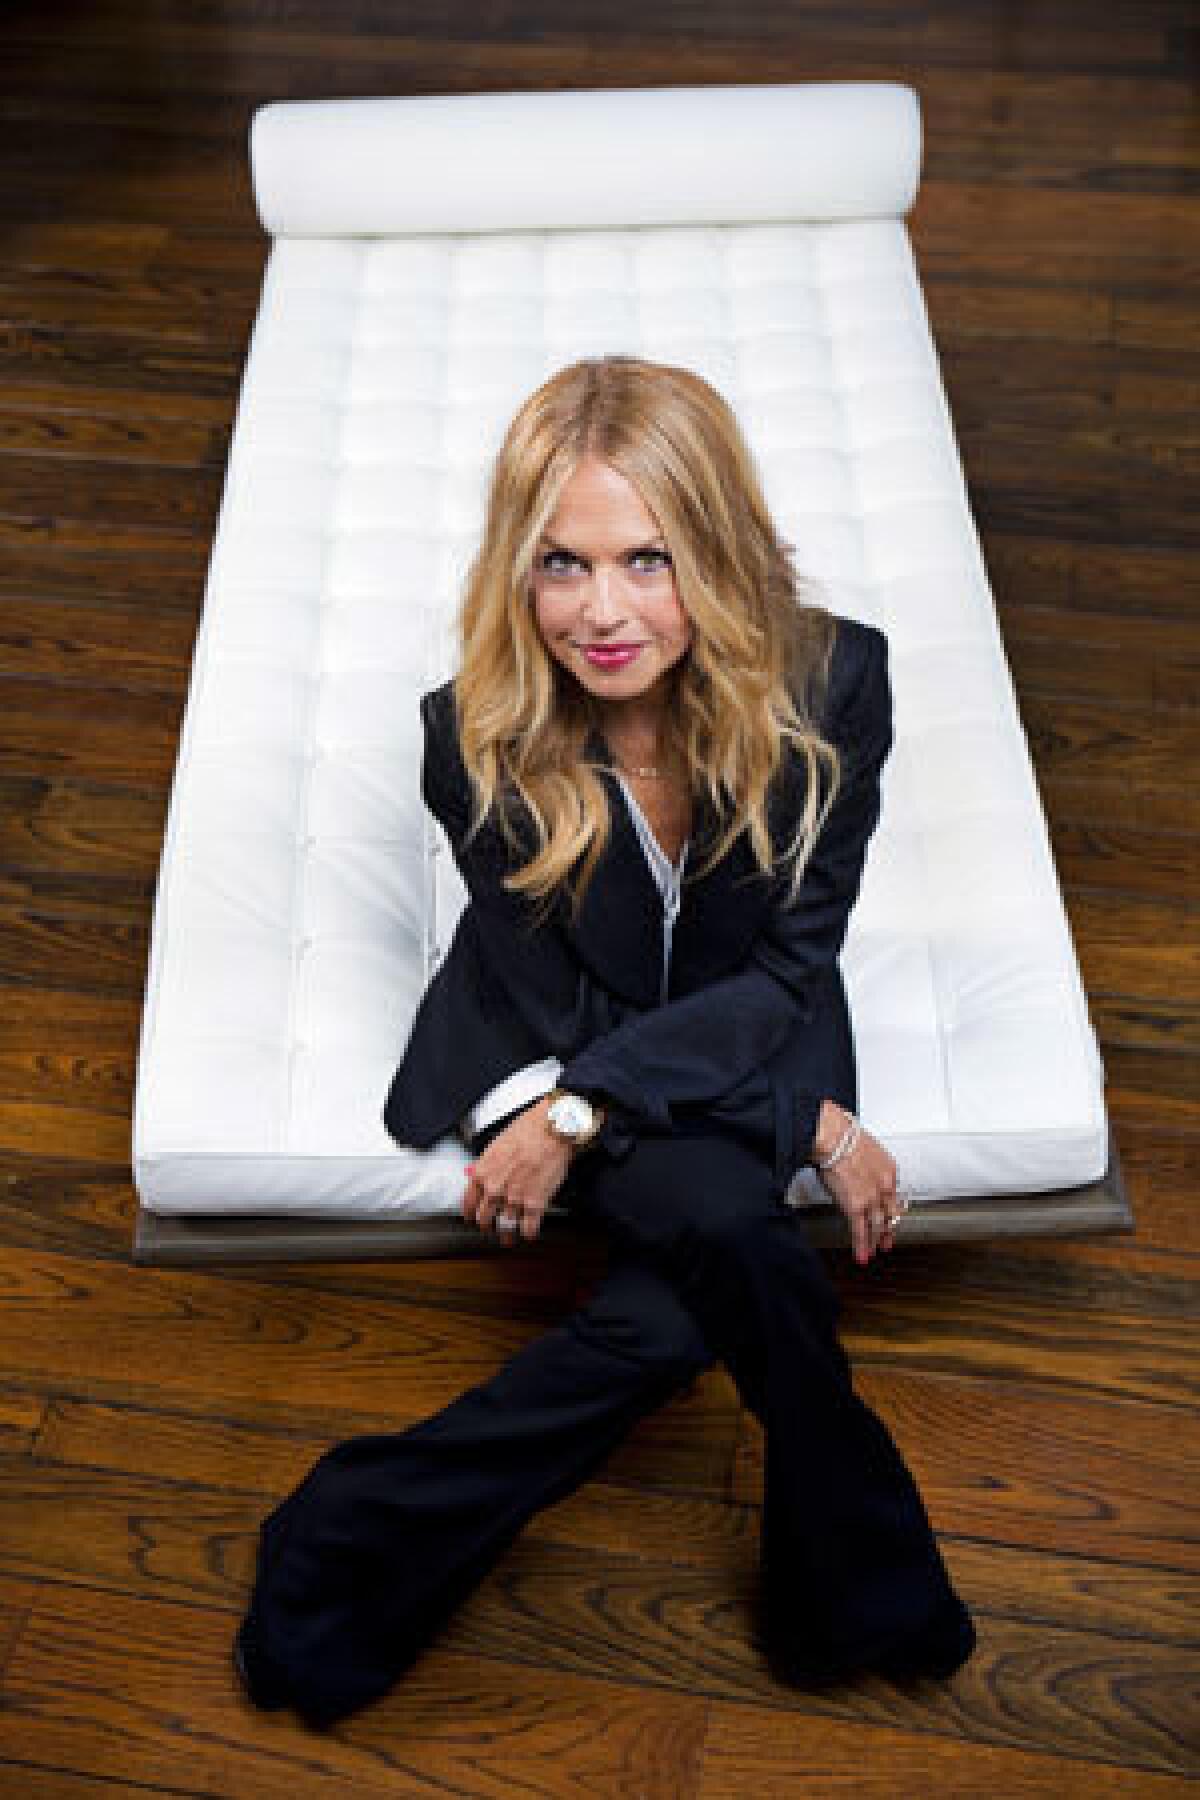 Rachel Zoe, pictured at home, “has a great eye, a larger-than-life personality and a whole entertainment world built around her,” says trend forecaster Catherine Moellering.